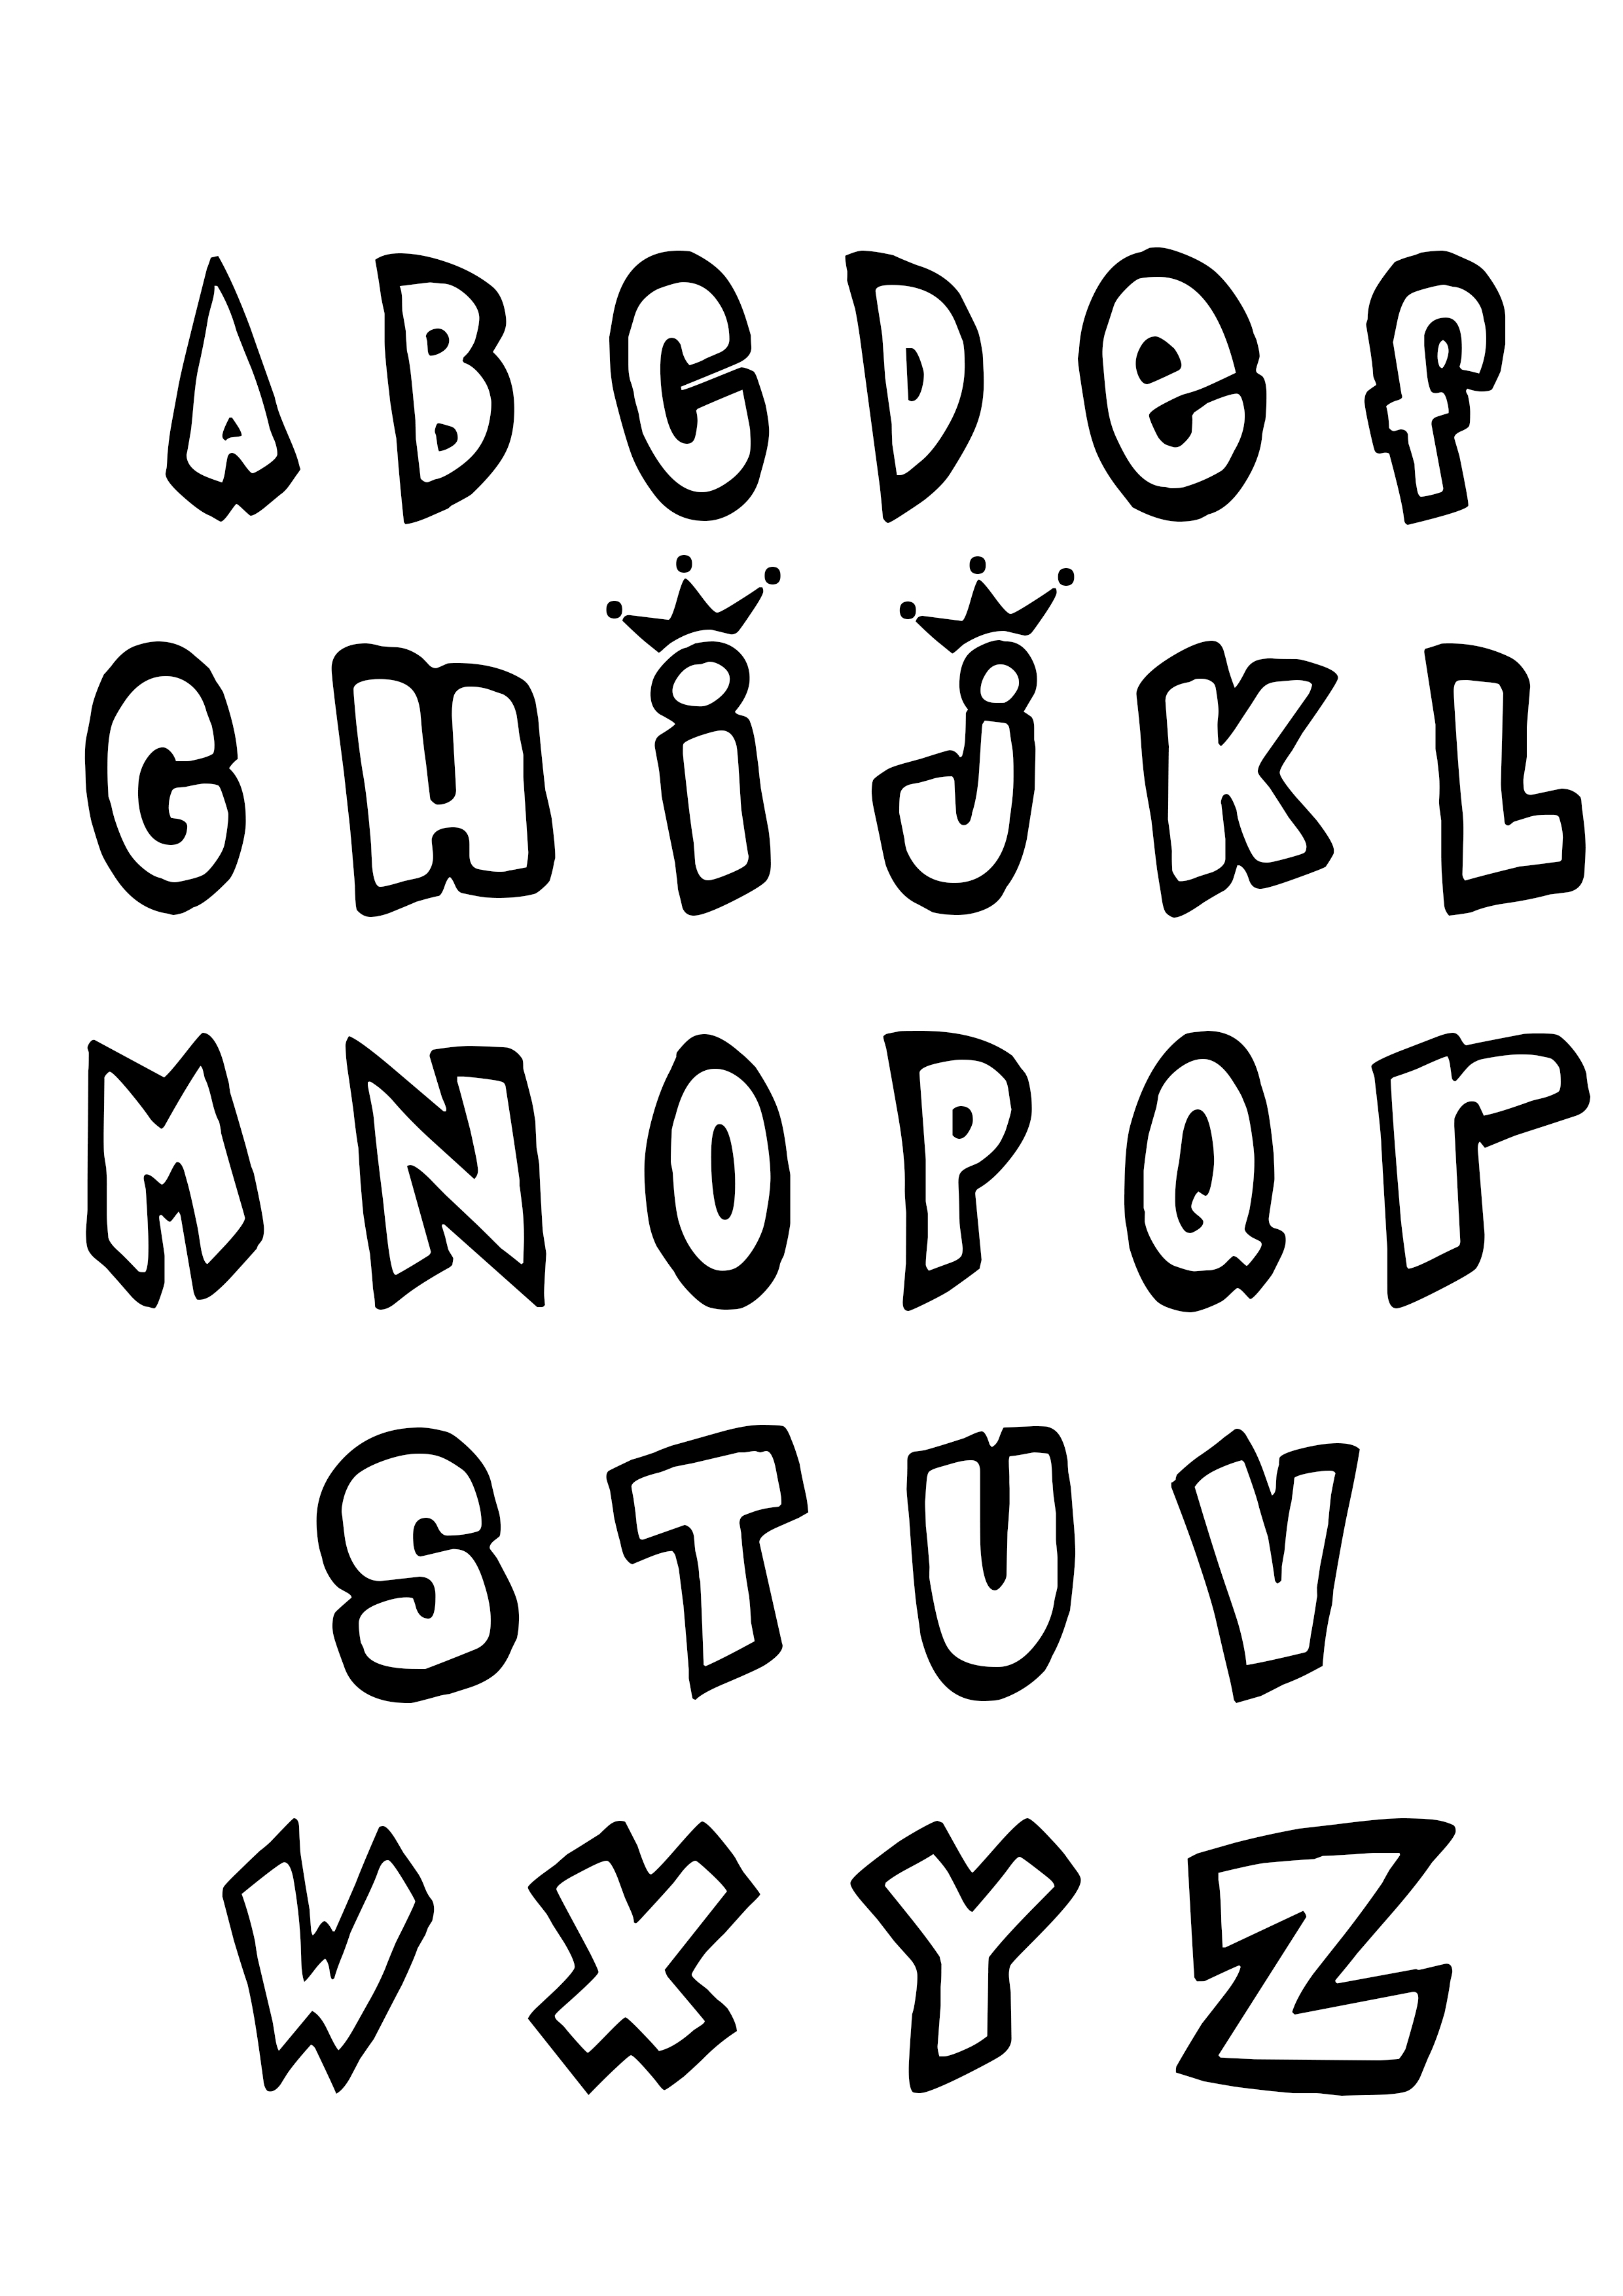 Alphabet to download for free : From A to Z - Alphabet ...